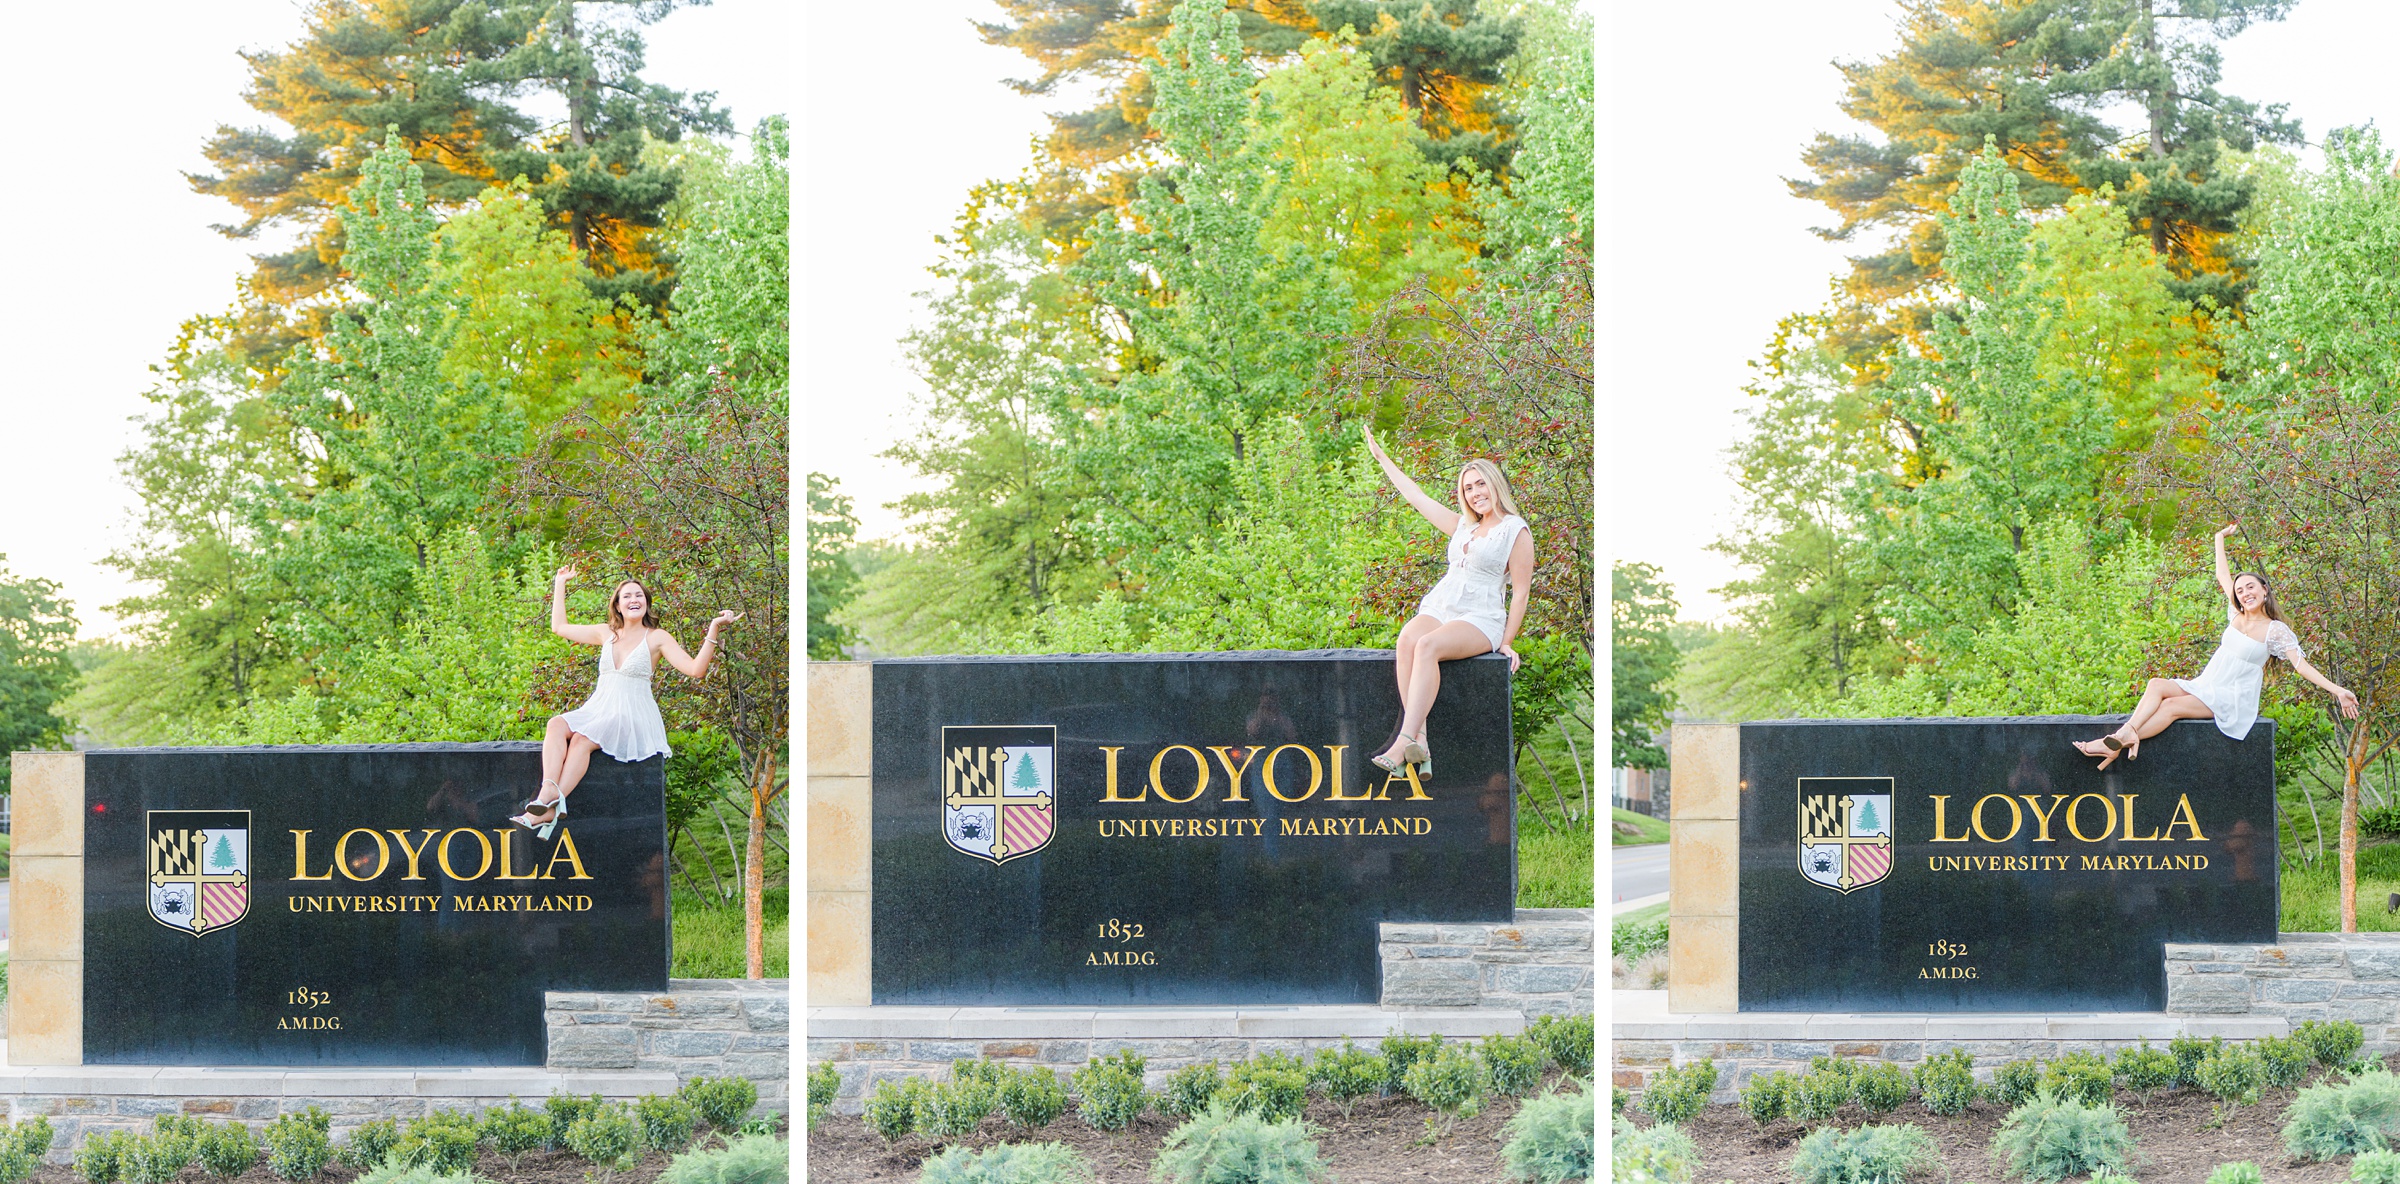 Loyola seniors pose on Loyola University Maryland's campus in graduation attire during Baltimore Grad Session photographed by Cait Kramer